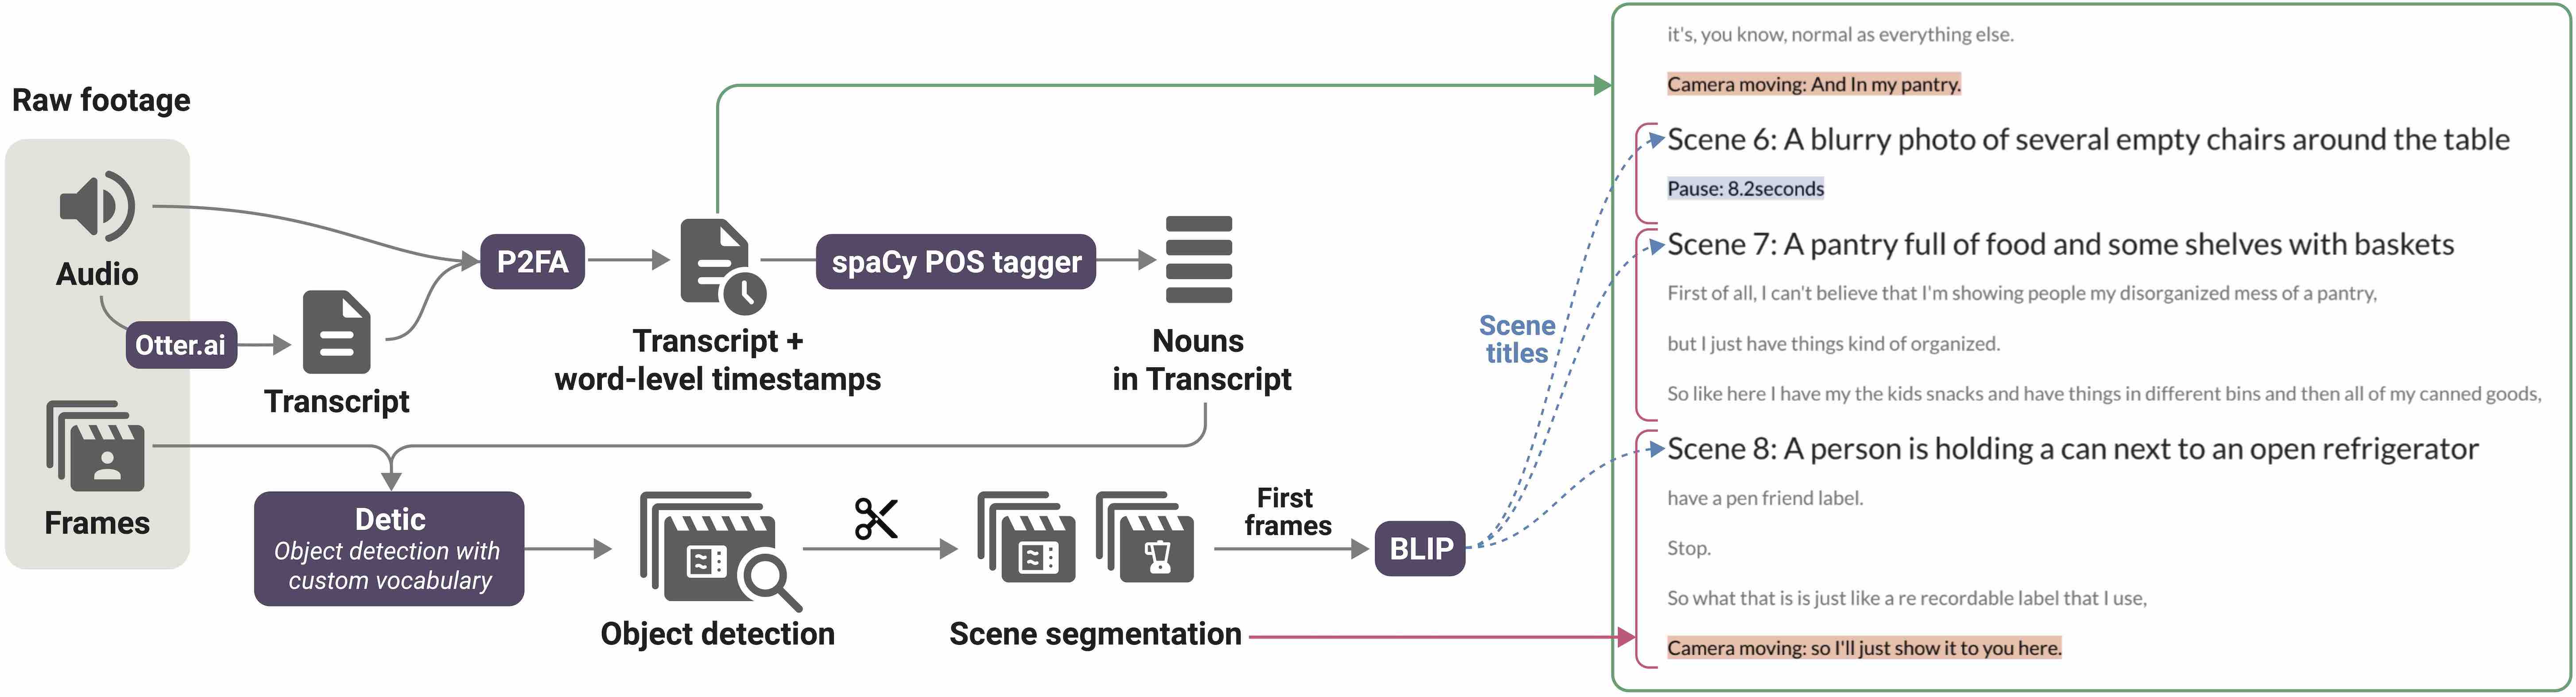 The figure shows how audio and visual frames of the video are processed to segment scenes, generate scene descriptions, and detect pauses and visual errors. On the right, the resulting audio-visual script is shown.